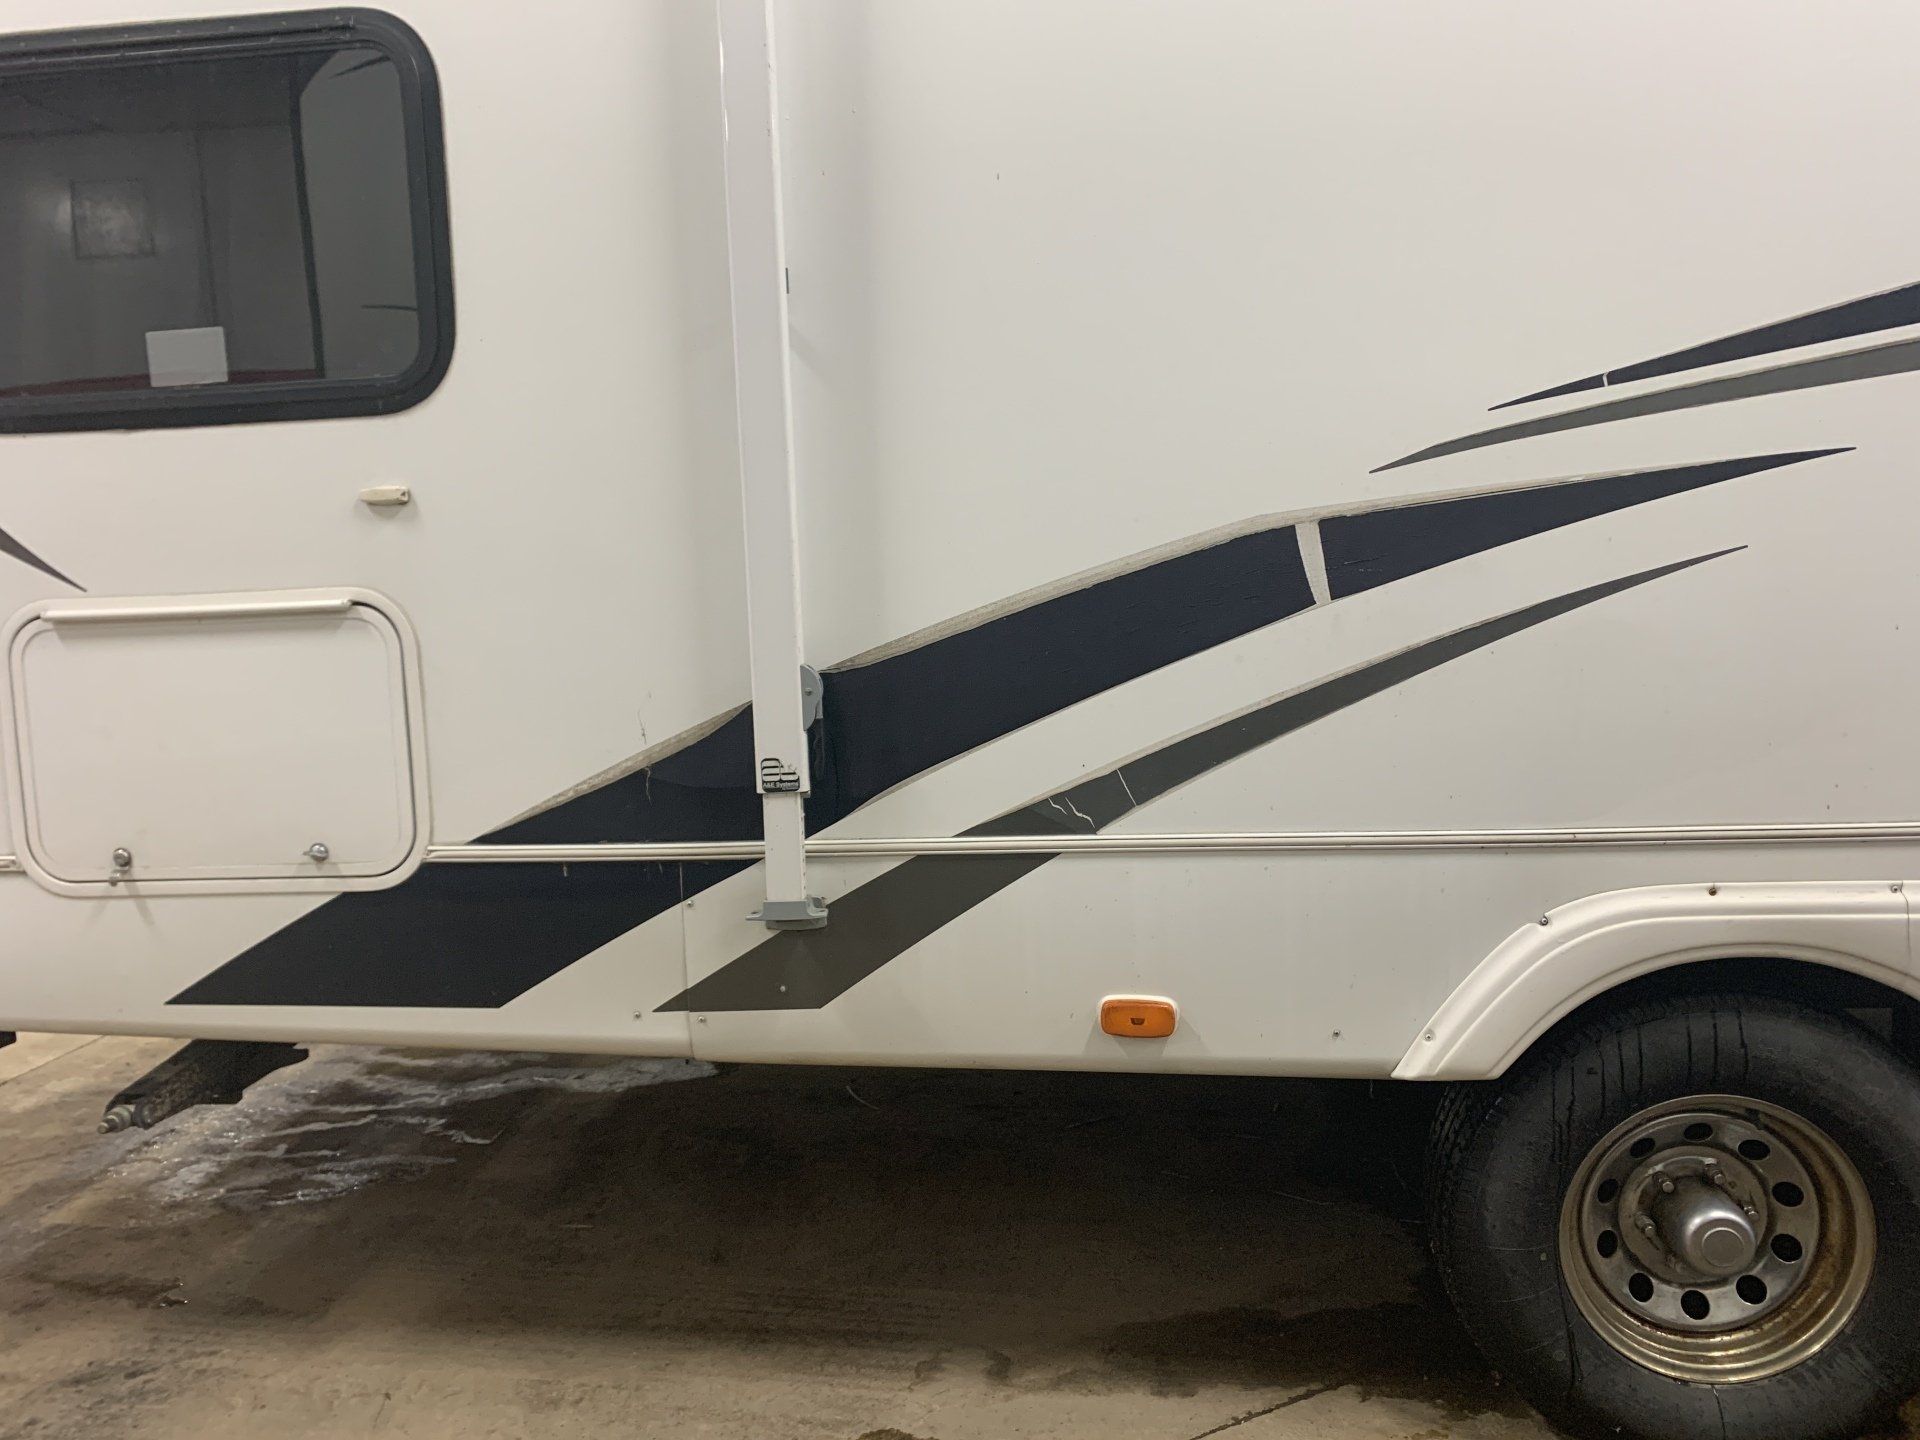 2020 - Alberta's Worst RV Decal Contest - Grand Prize Winner - Before & After - Pic 14